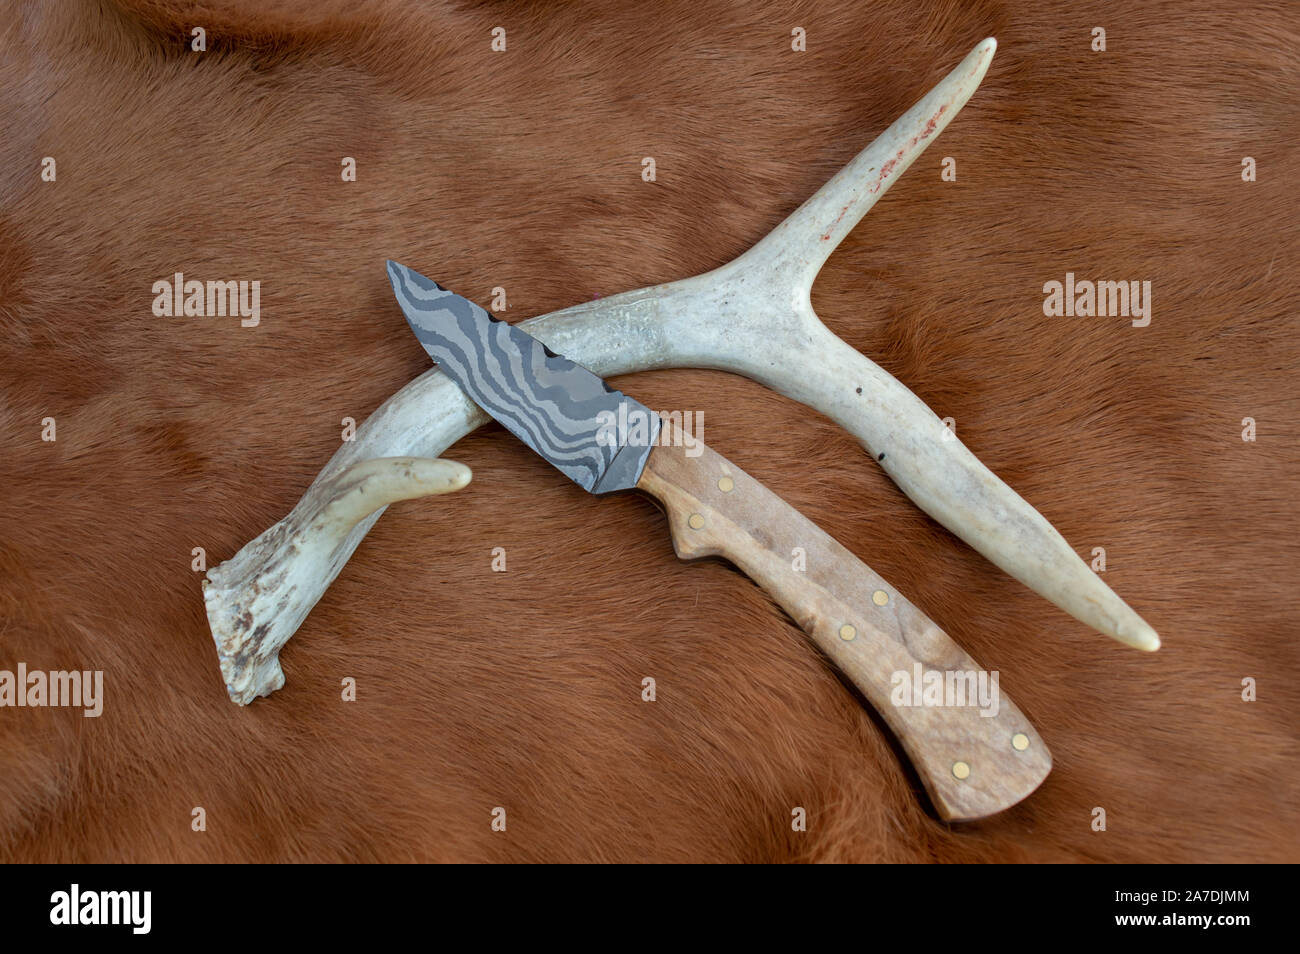 A pretty damascus fixed blade knife displayed on a deer antler and colored rabbit fur. The handle is made of box elder Bokeh. Stock Photo